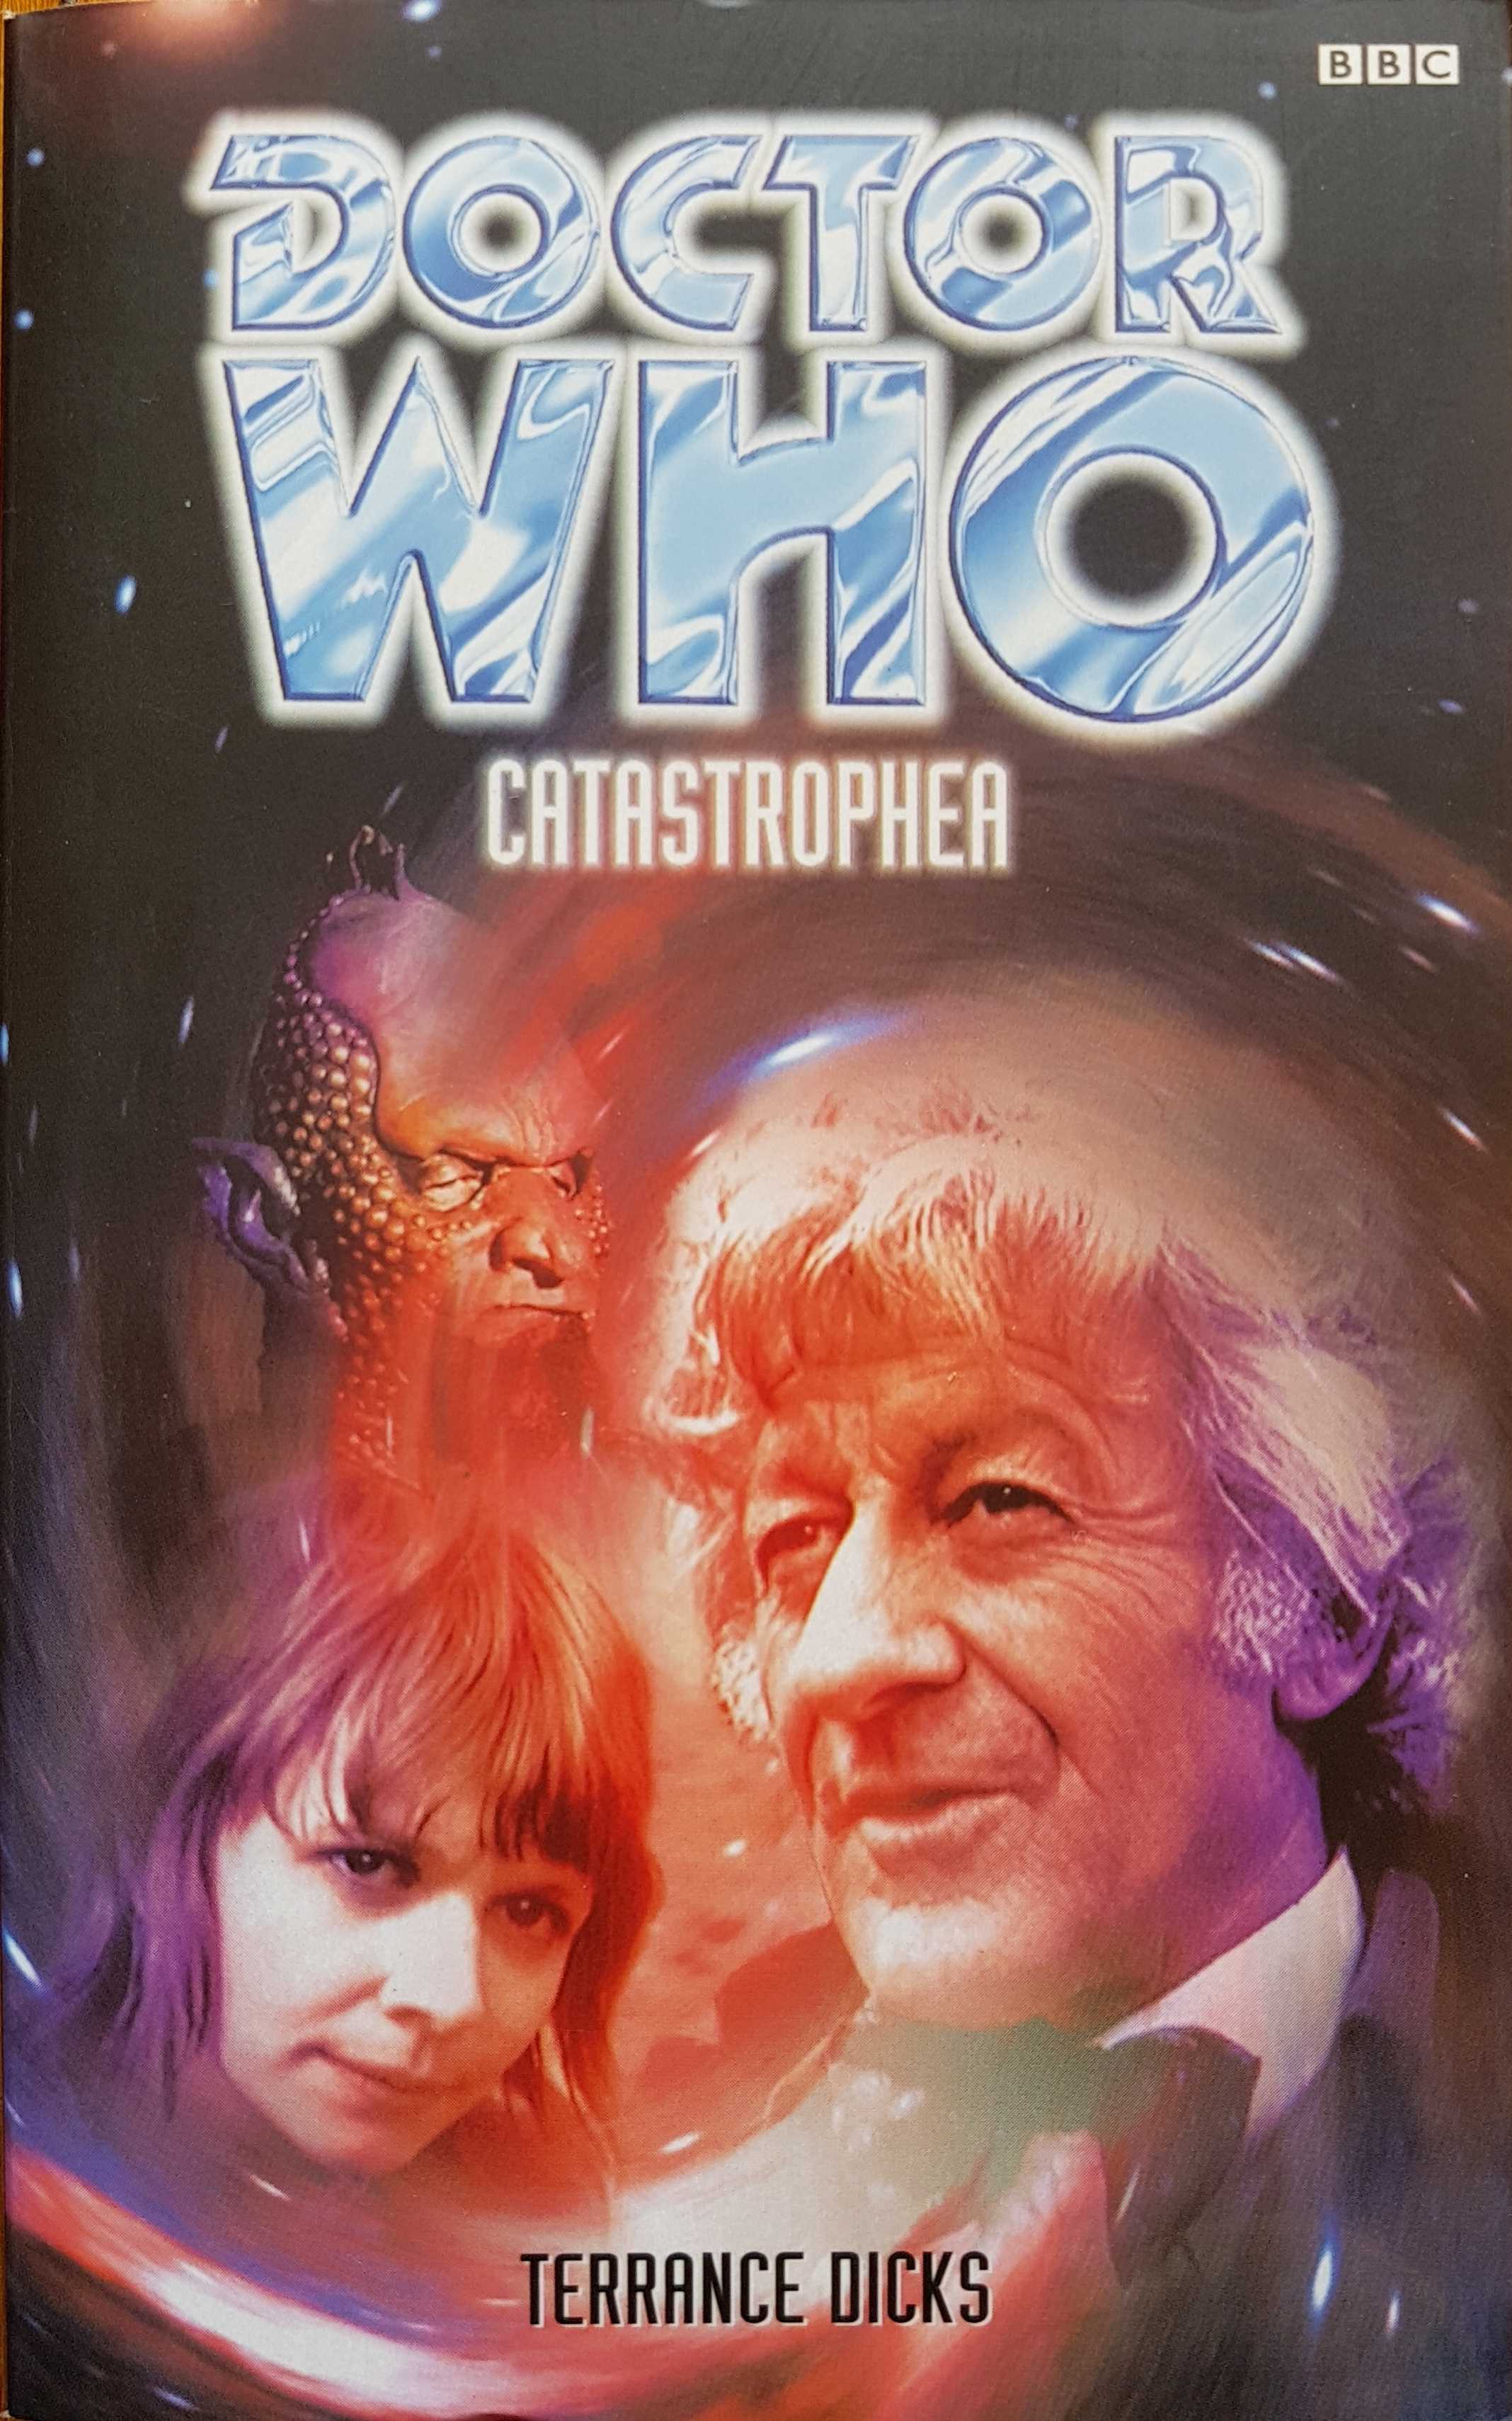 Picture of Doctor Who - Catastropher by artist Terrance Dicks from the BBC books - Records and Tapes library